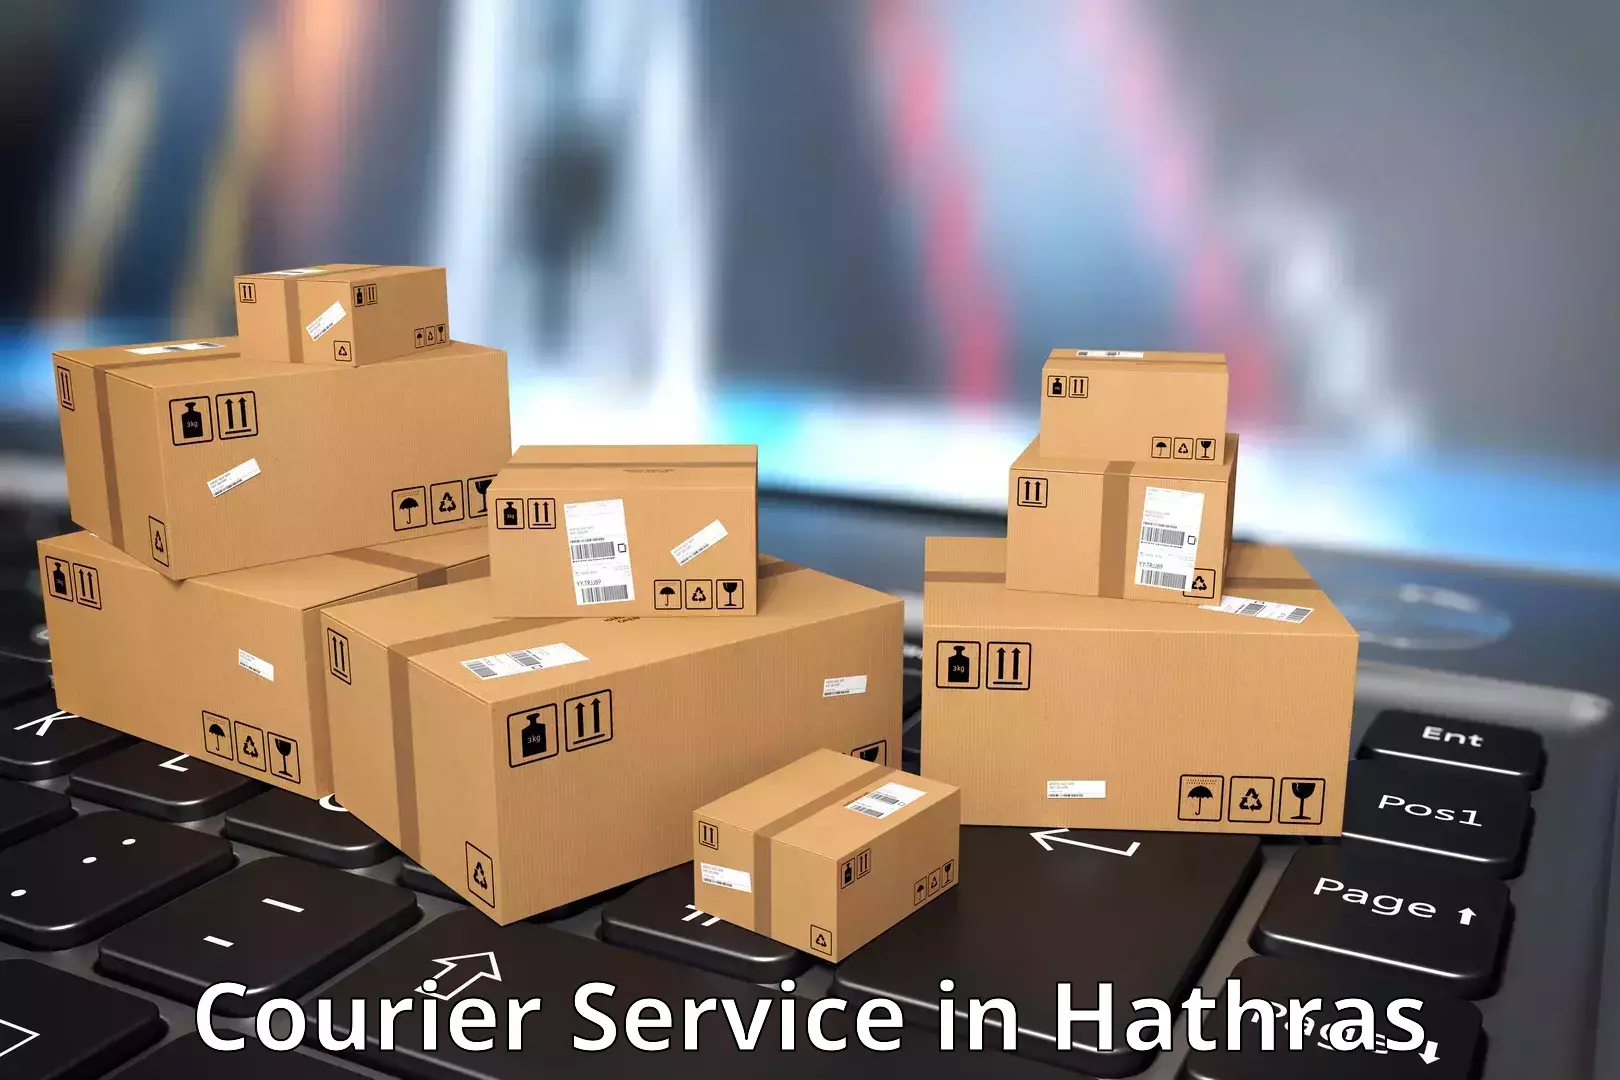 24-hour courier service in Hathras